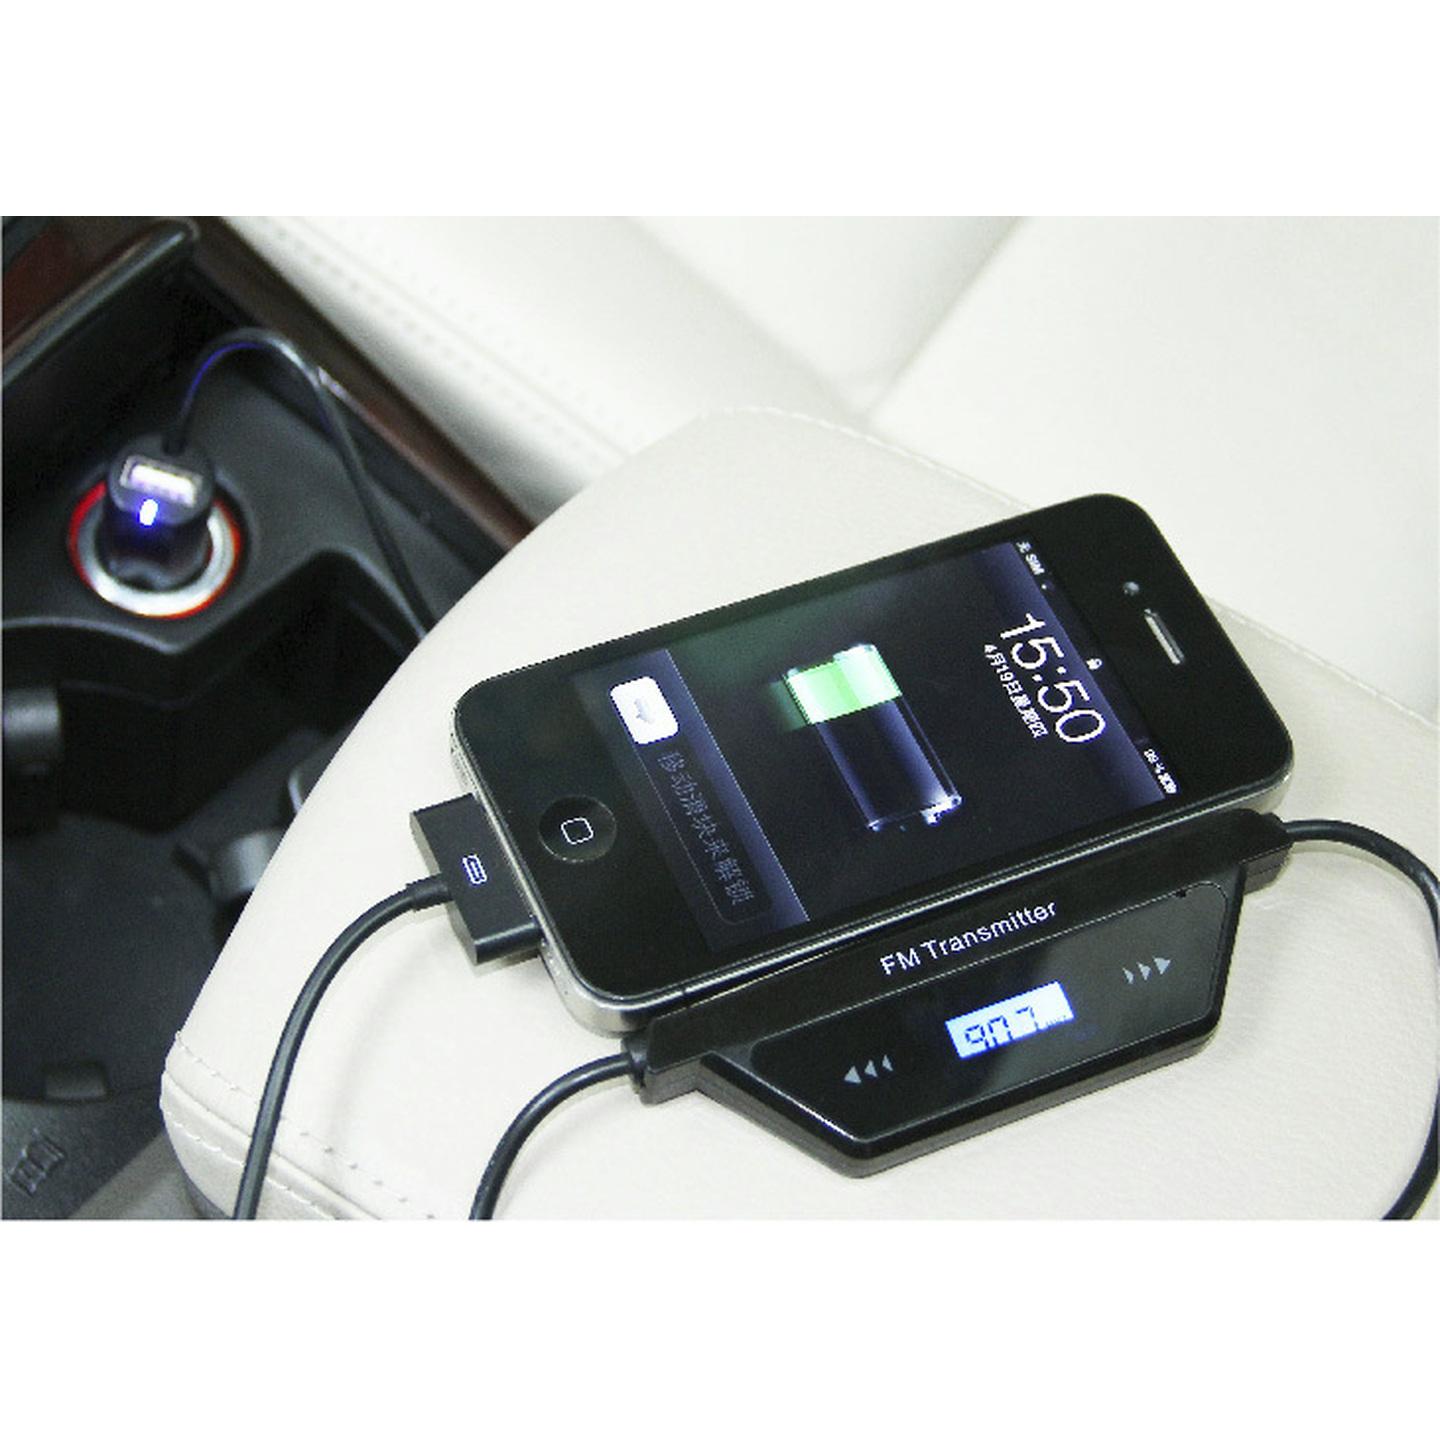 In-Car FM Transmitter for iPhone/iPad/iPod with Charger